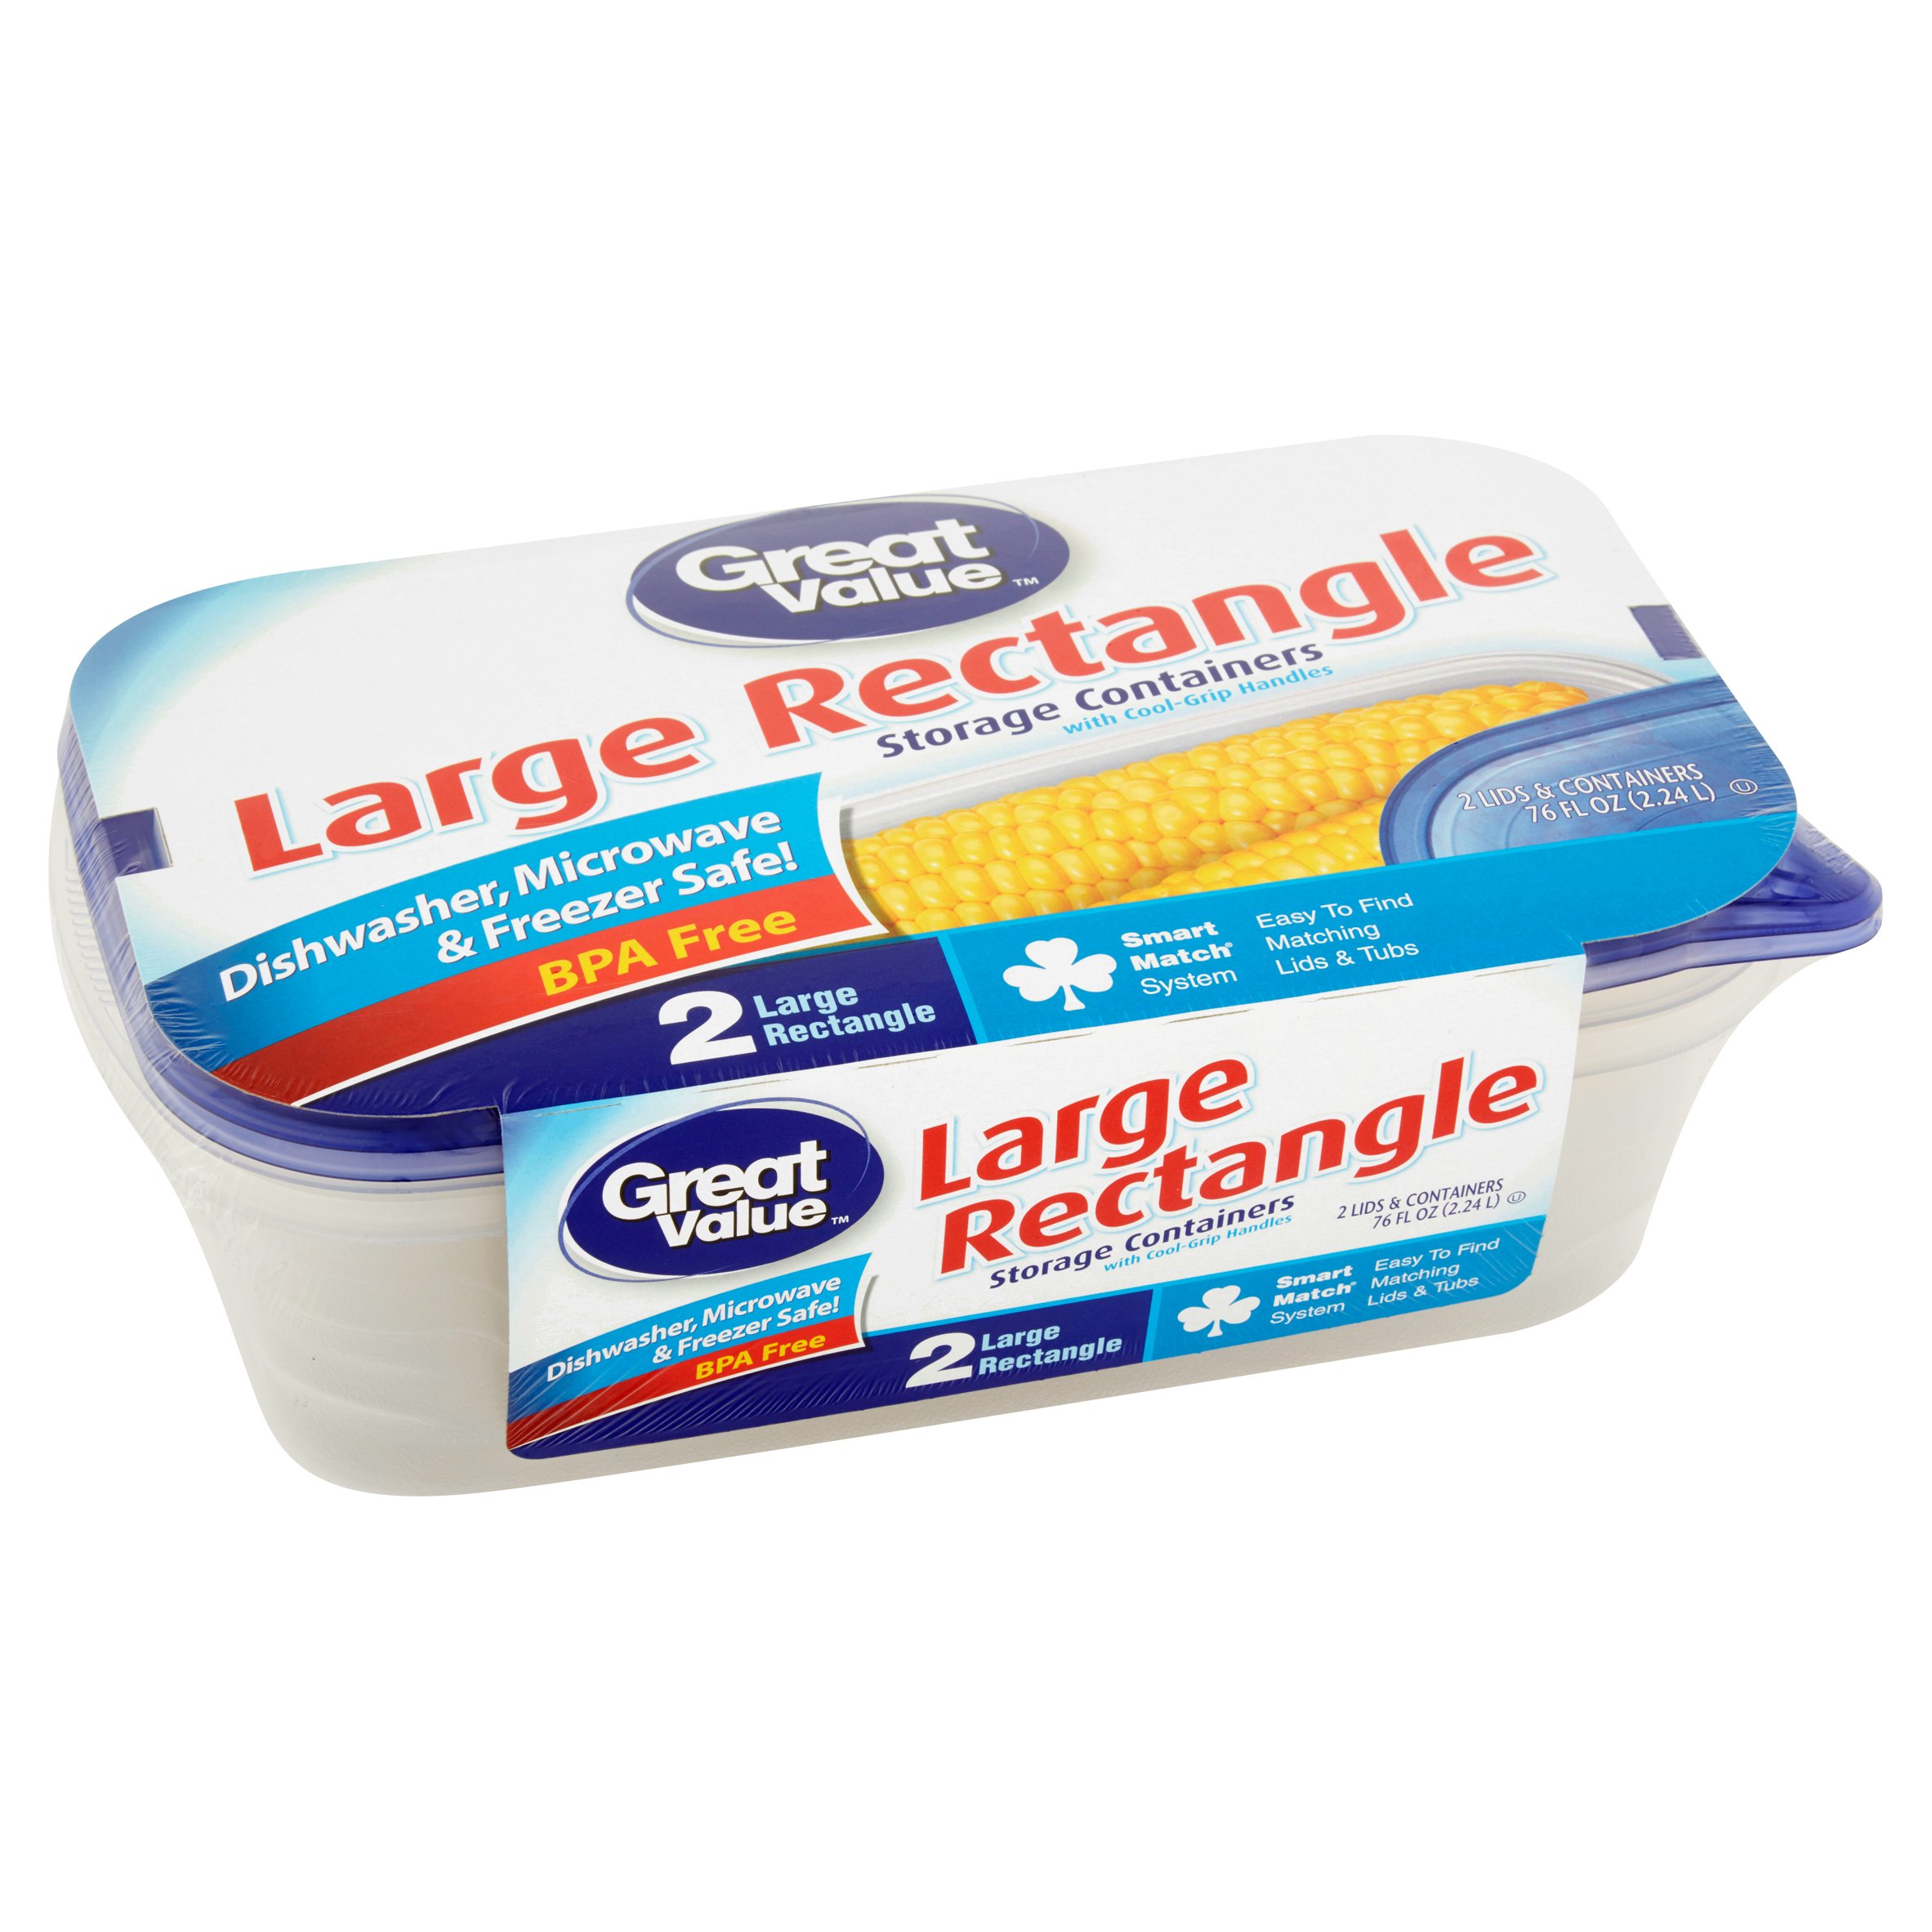 Great Value Take Outs Storage Container, BPA Free, Large Rectangle, 2 Count - image 2 of 5